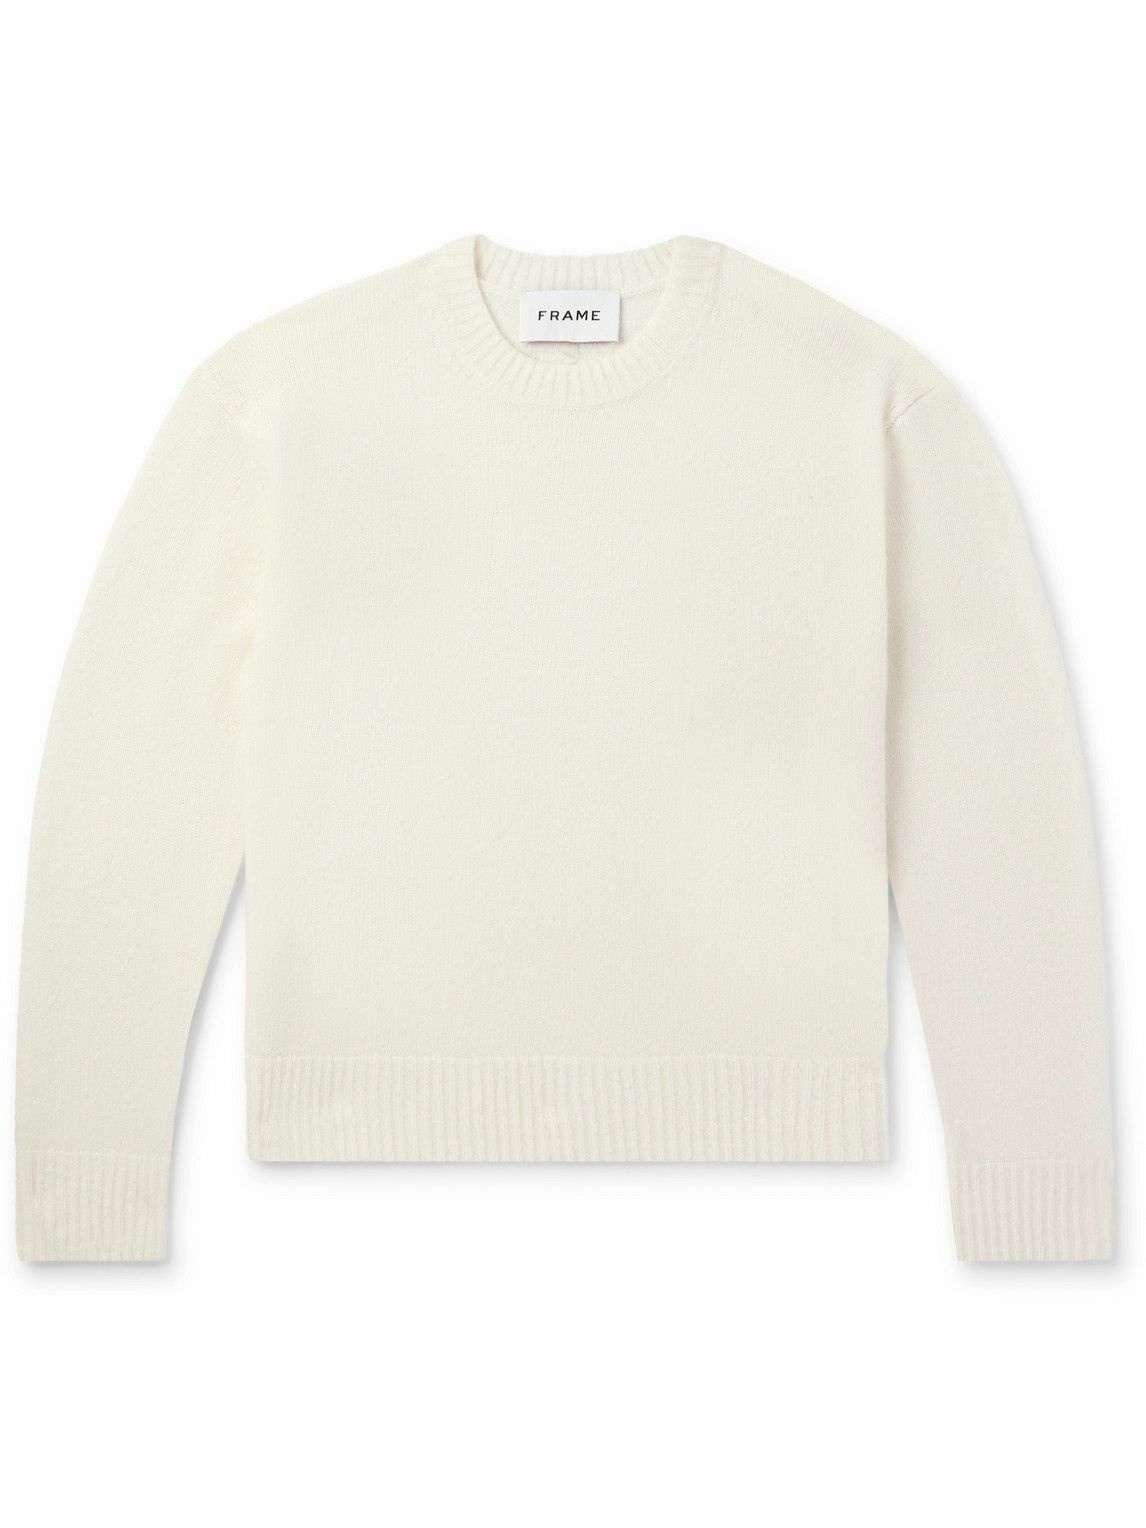 Photo: FRAME - Cashmere and Silk-Blend Sweater - White